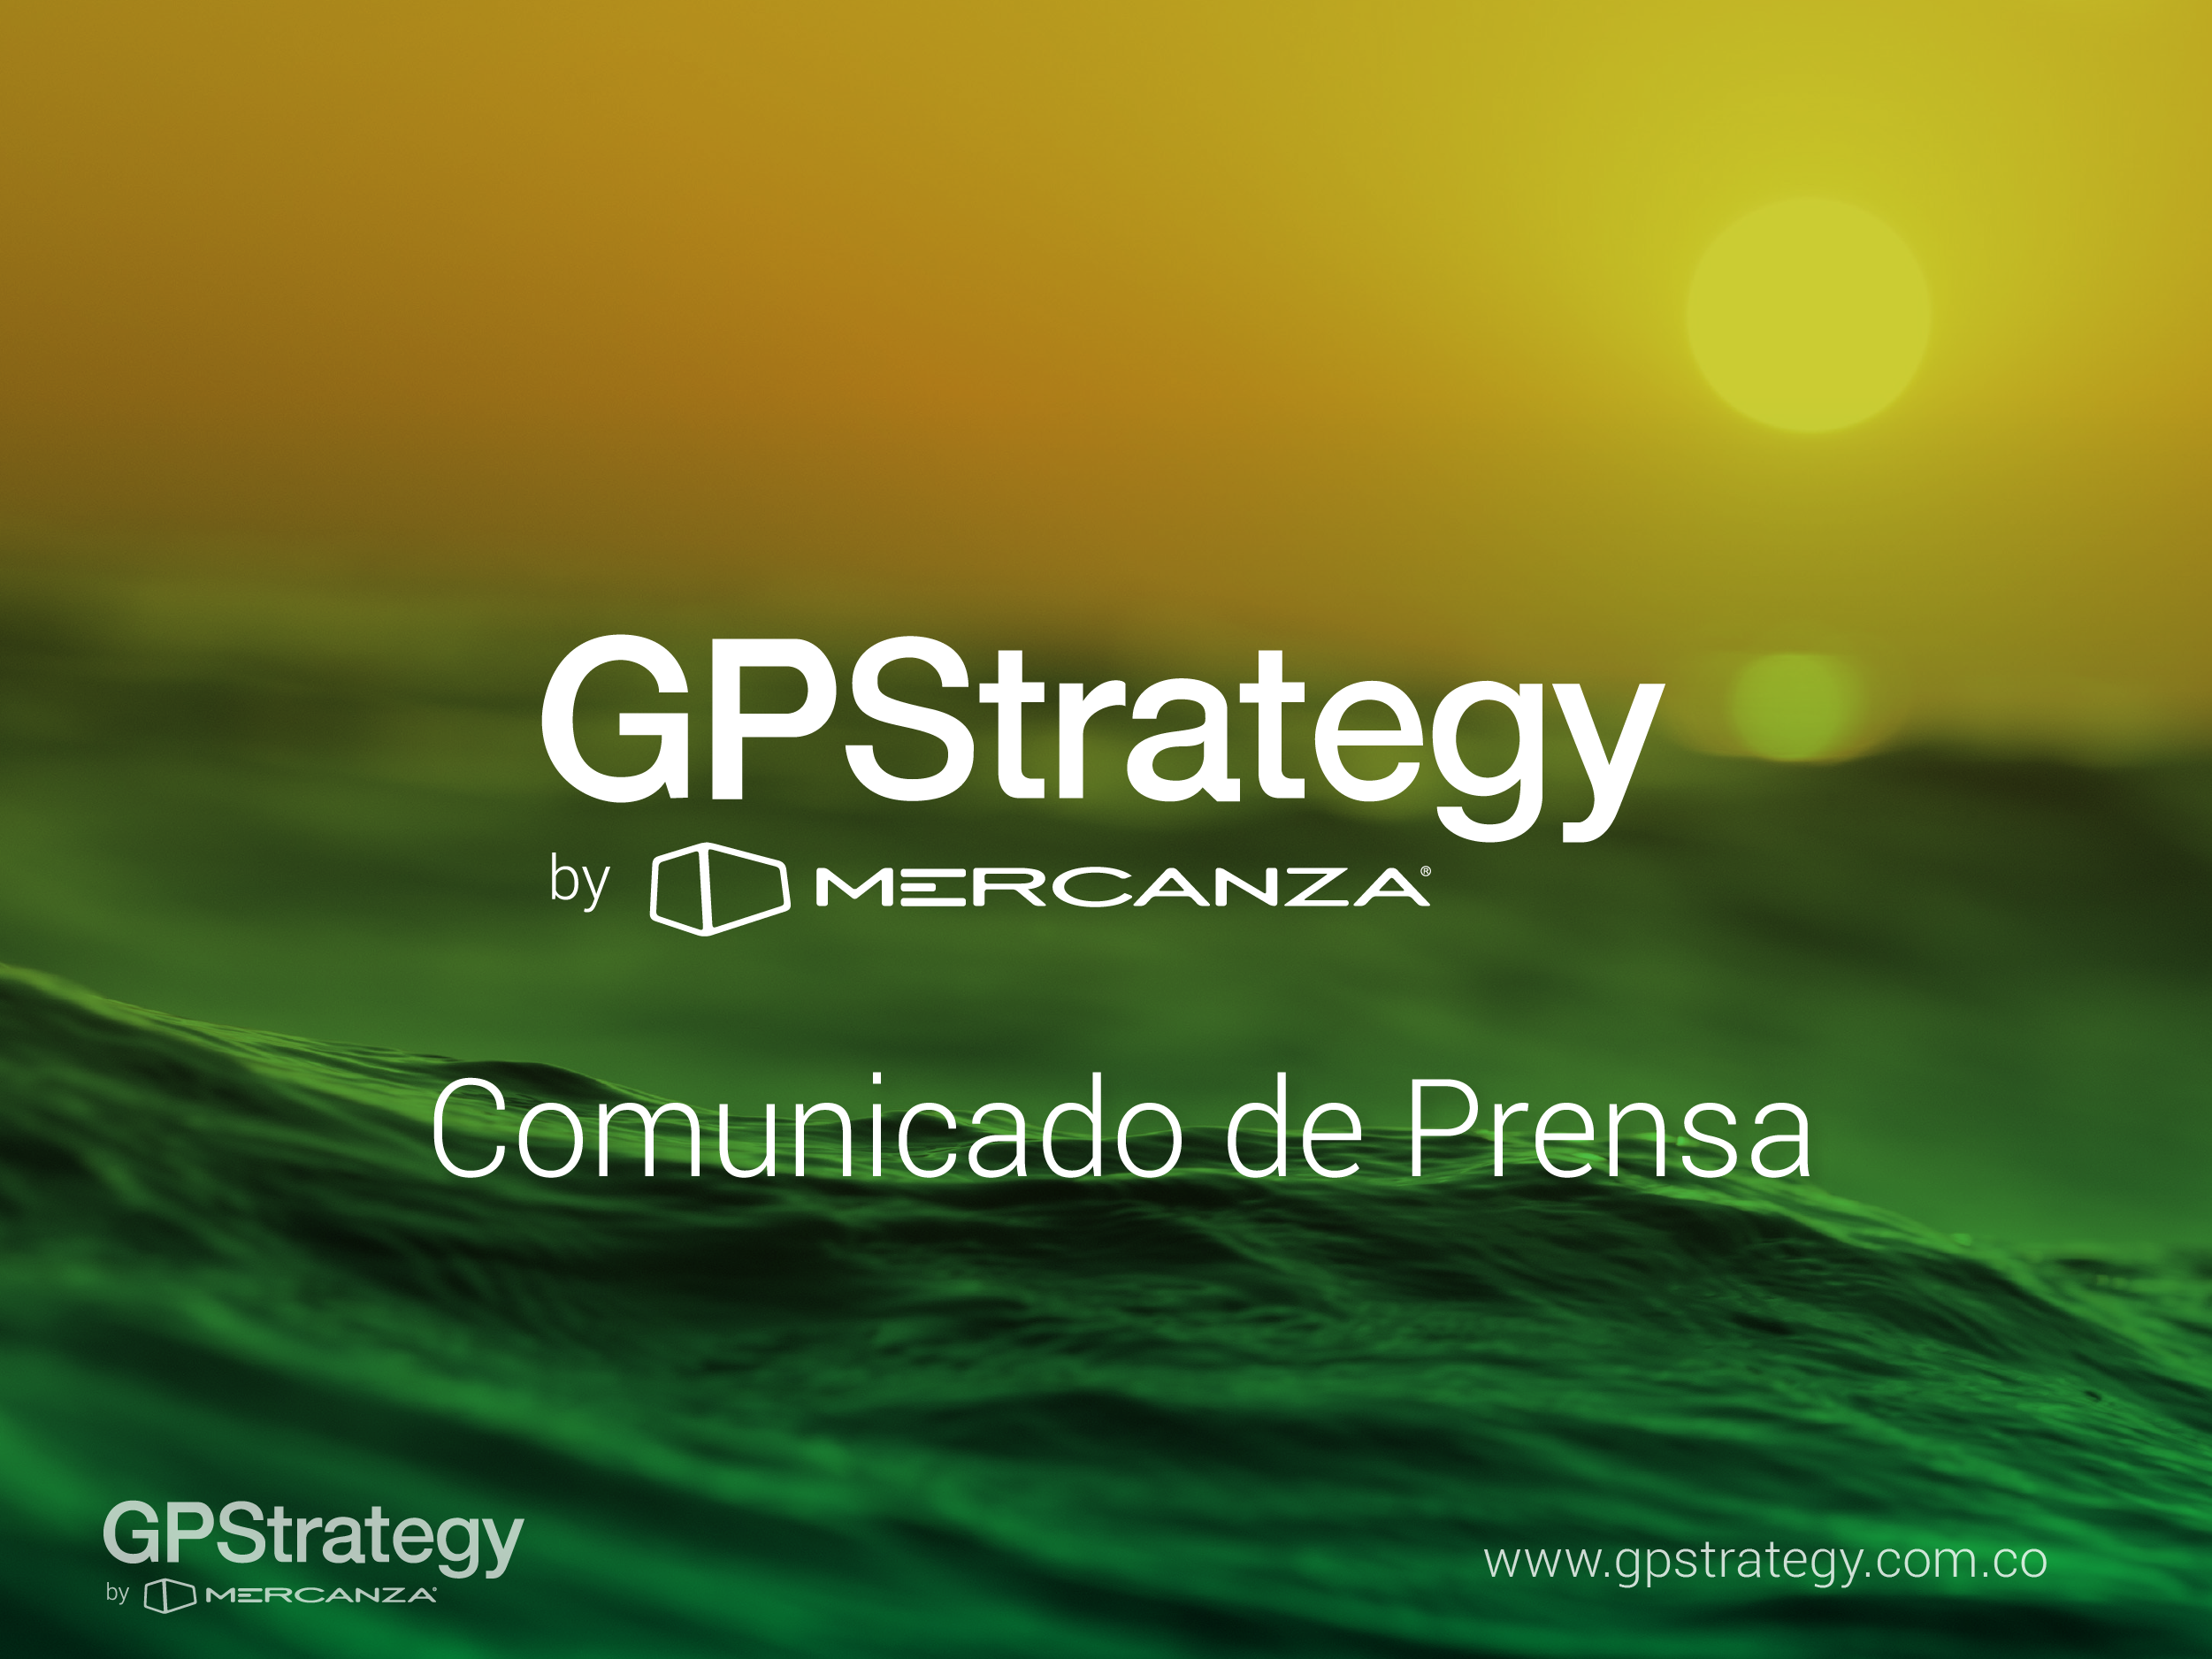 GPStrategy by Mercanza